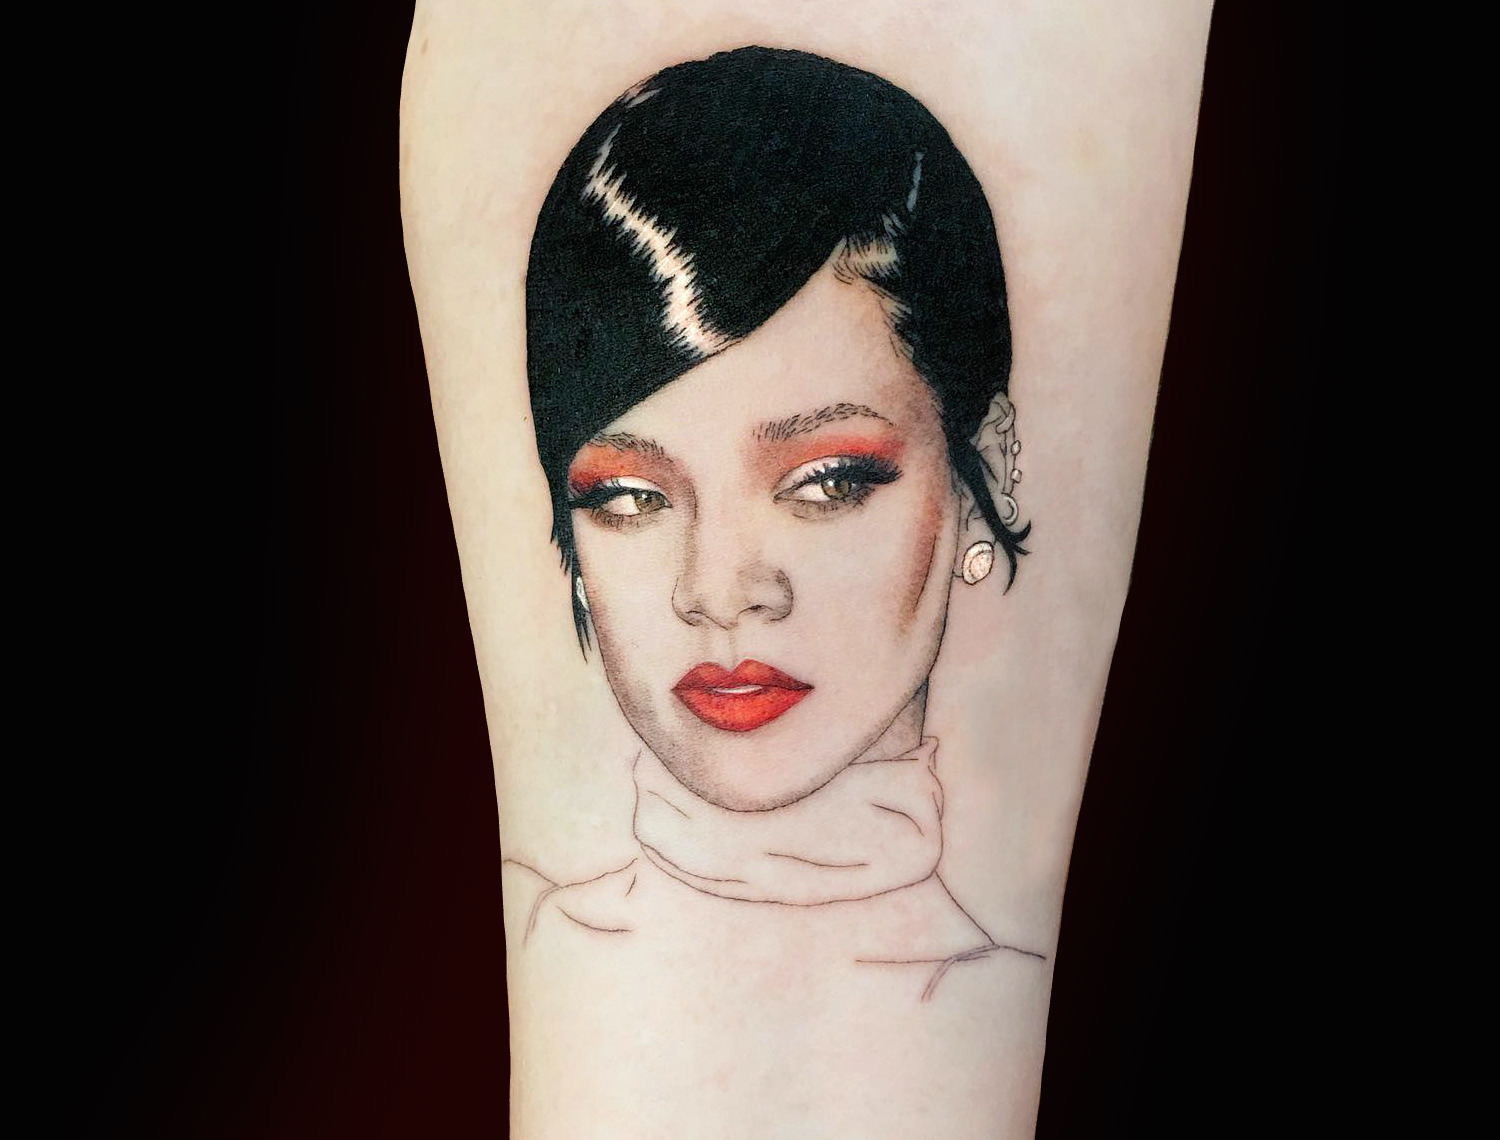 Glossy Rihanna portrait tattoo by Shannon Perry